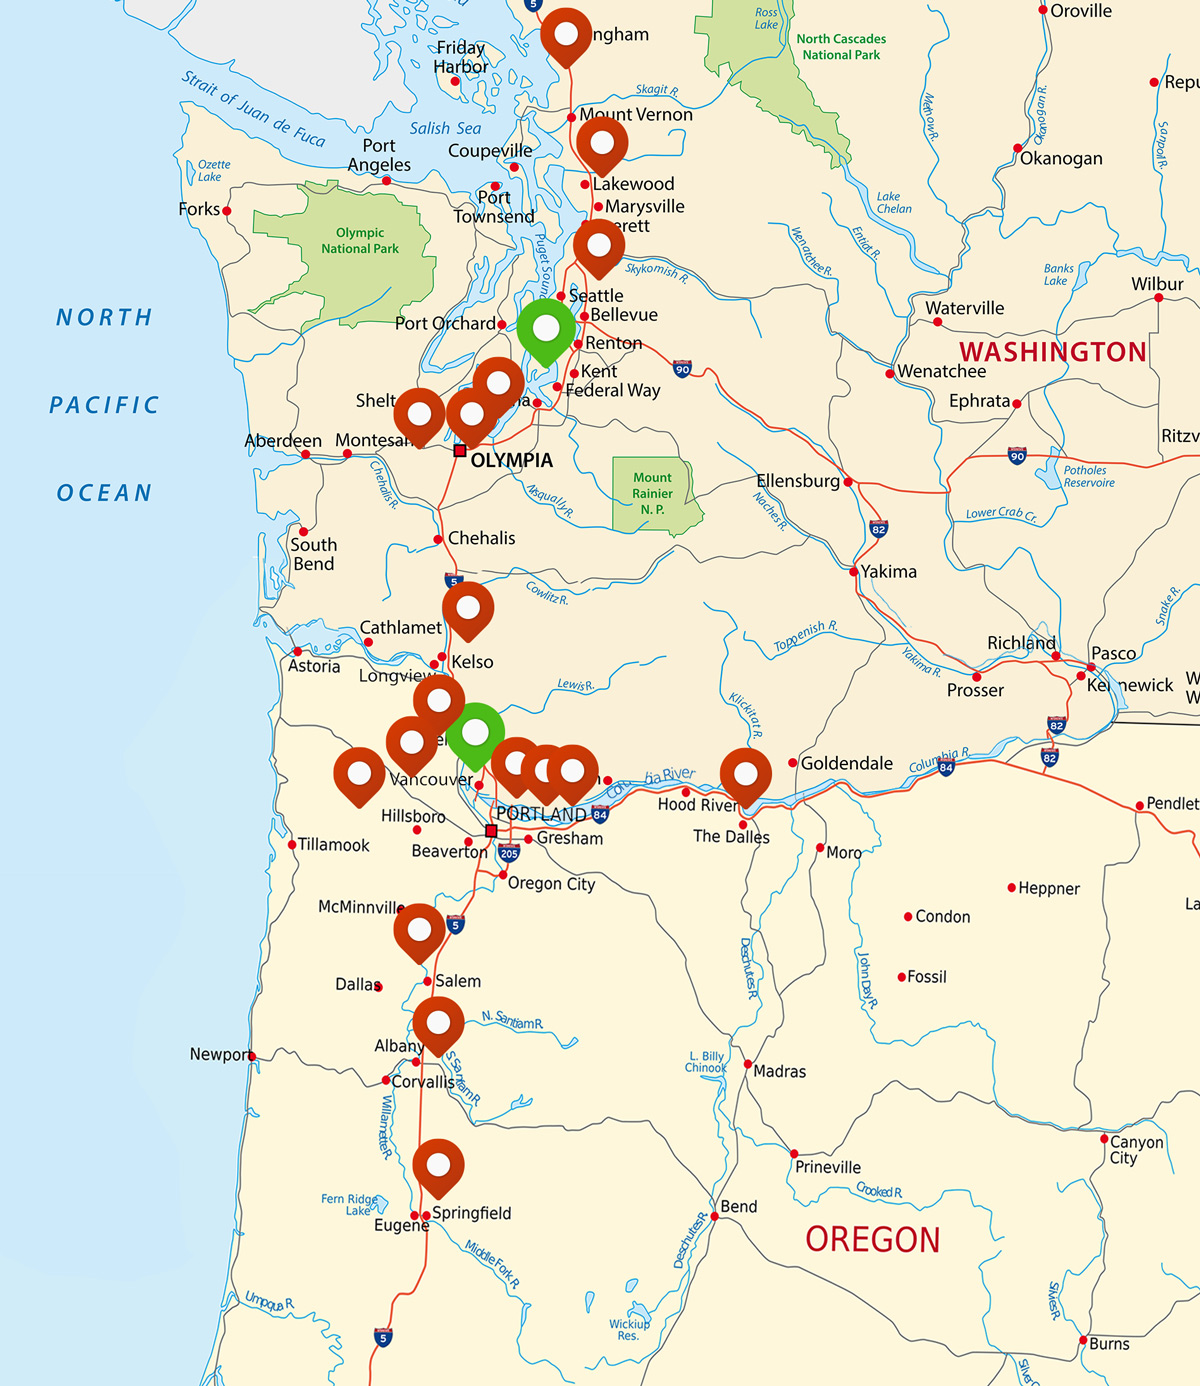 Map of US States Washington and Oregon with pins for service locations.